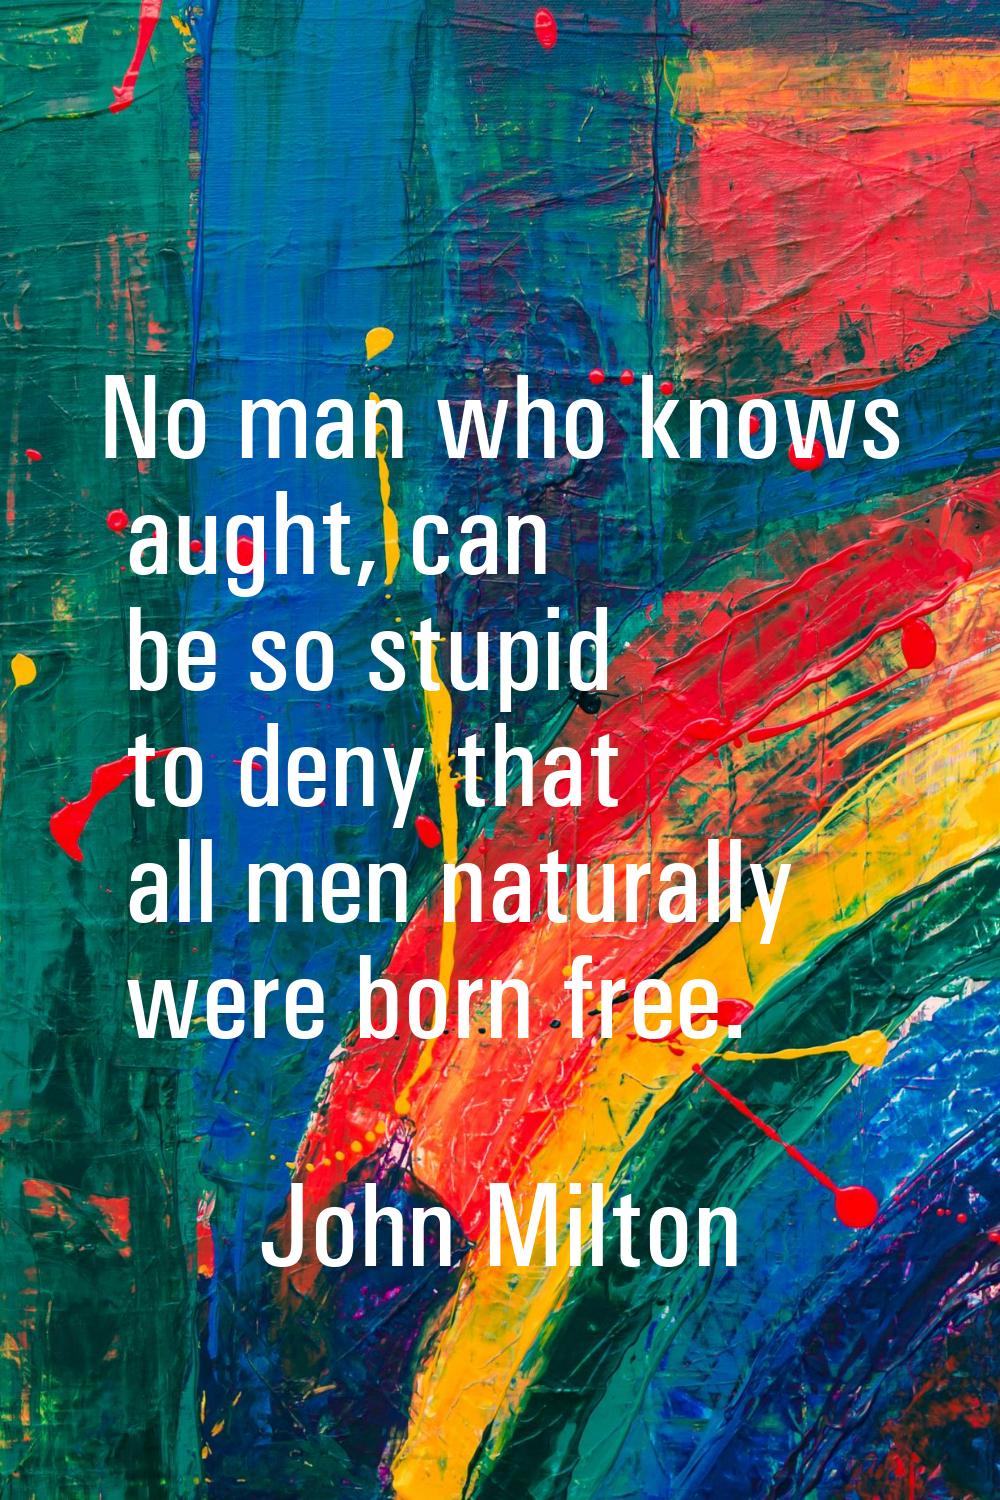 No man who knows aught, can be so stupid to deny that all men naturally were born free.